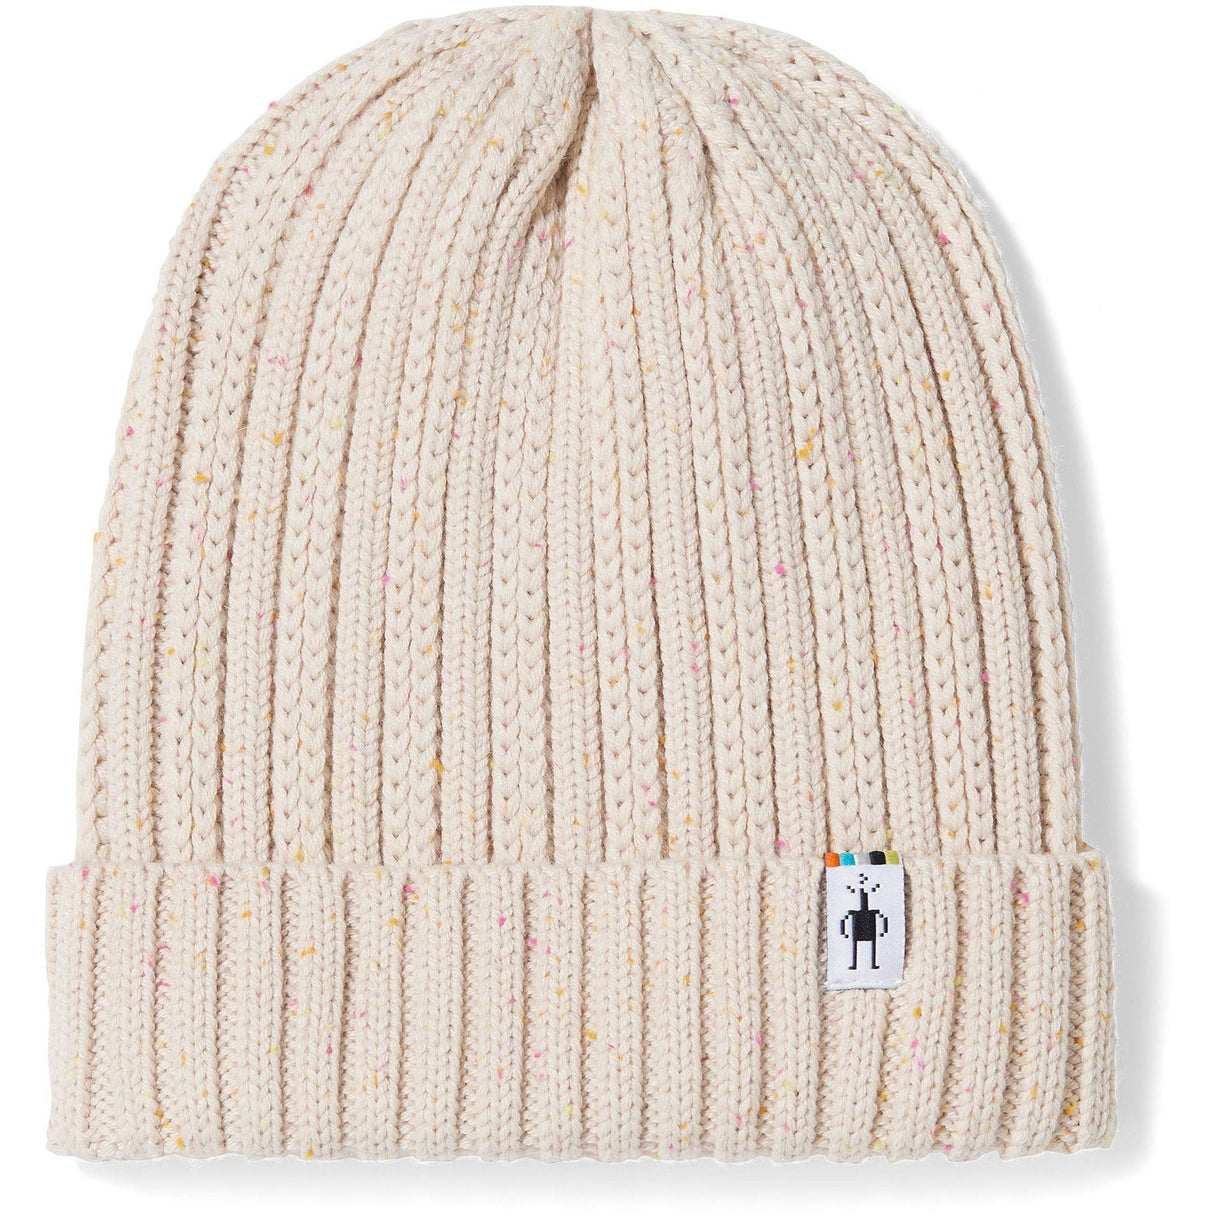 Smartwool Rib Knit Hat  -  One Size Fits Most / Almond Donegal